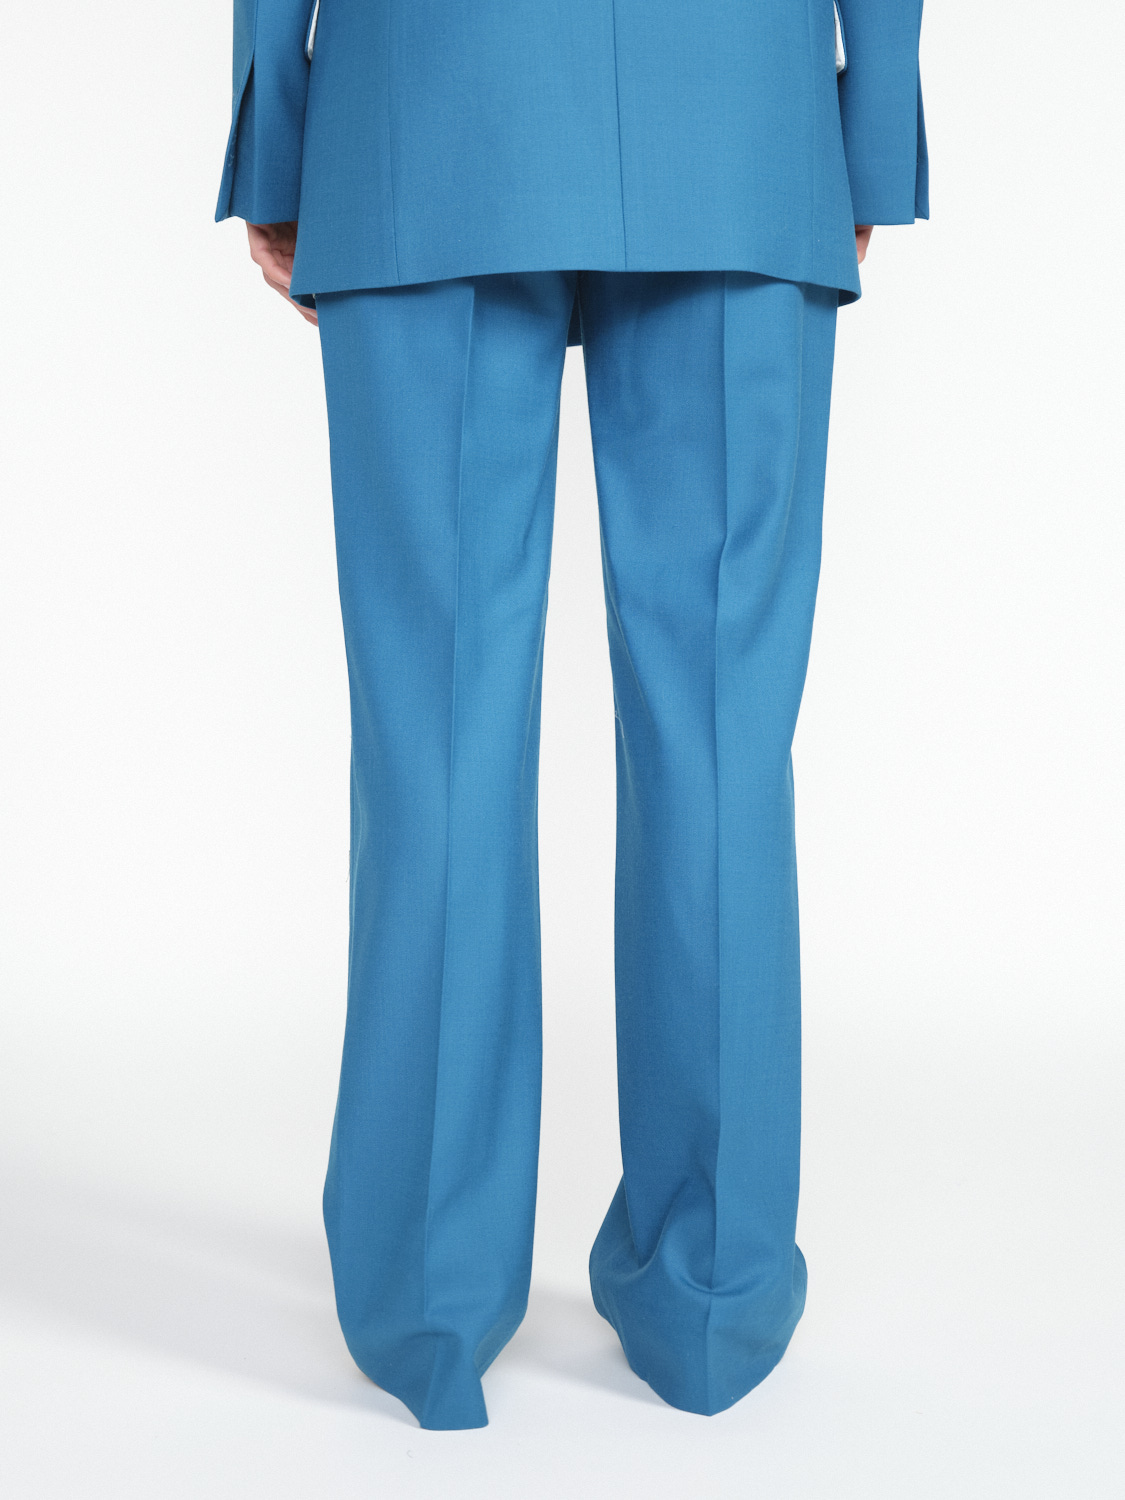 Victoria Beckham Pleated trousers with pockets  petrol 36